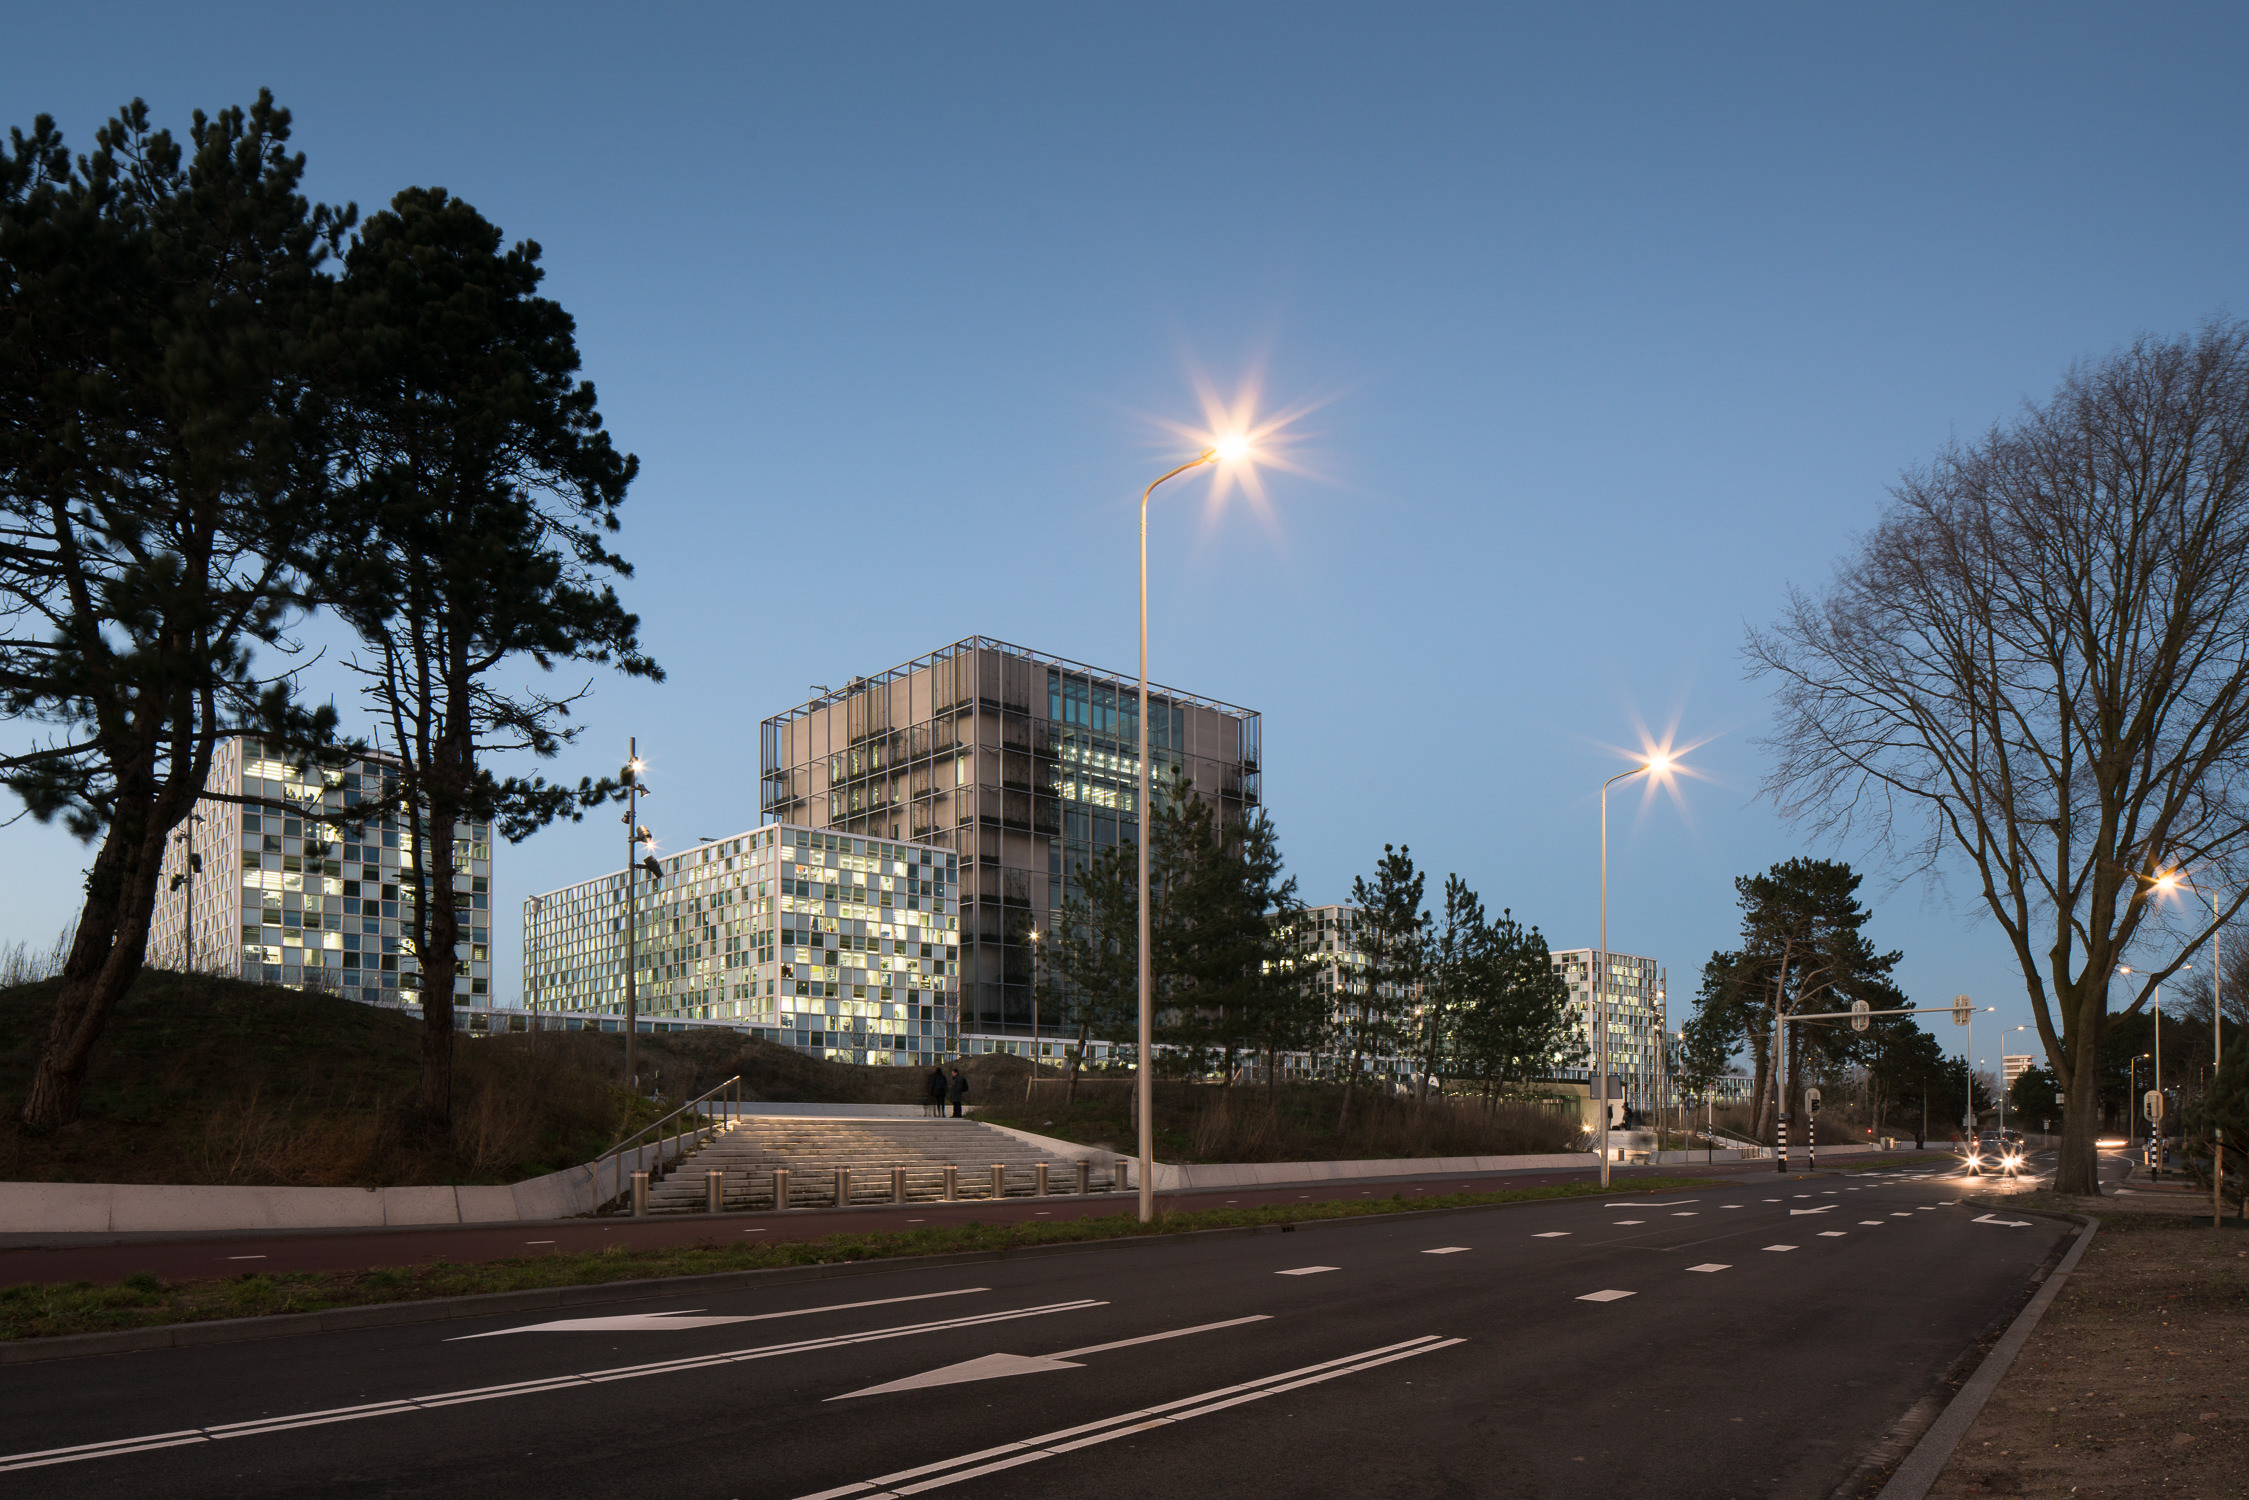 icc den haag at night from the street by schmidt hammer lasson